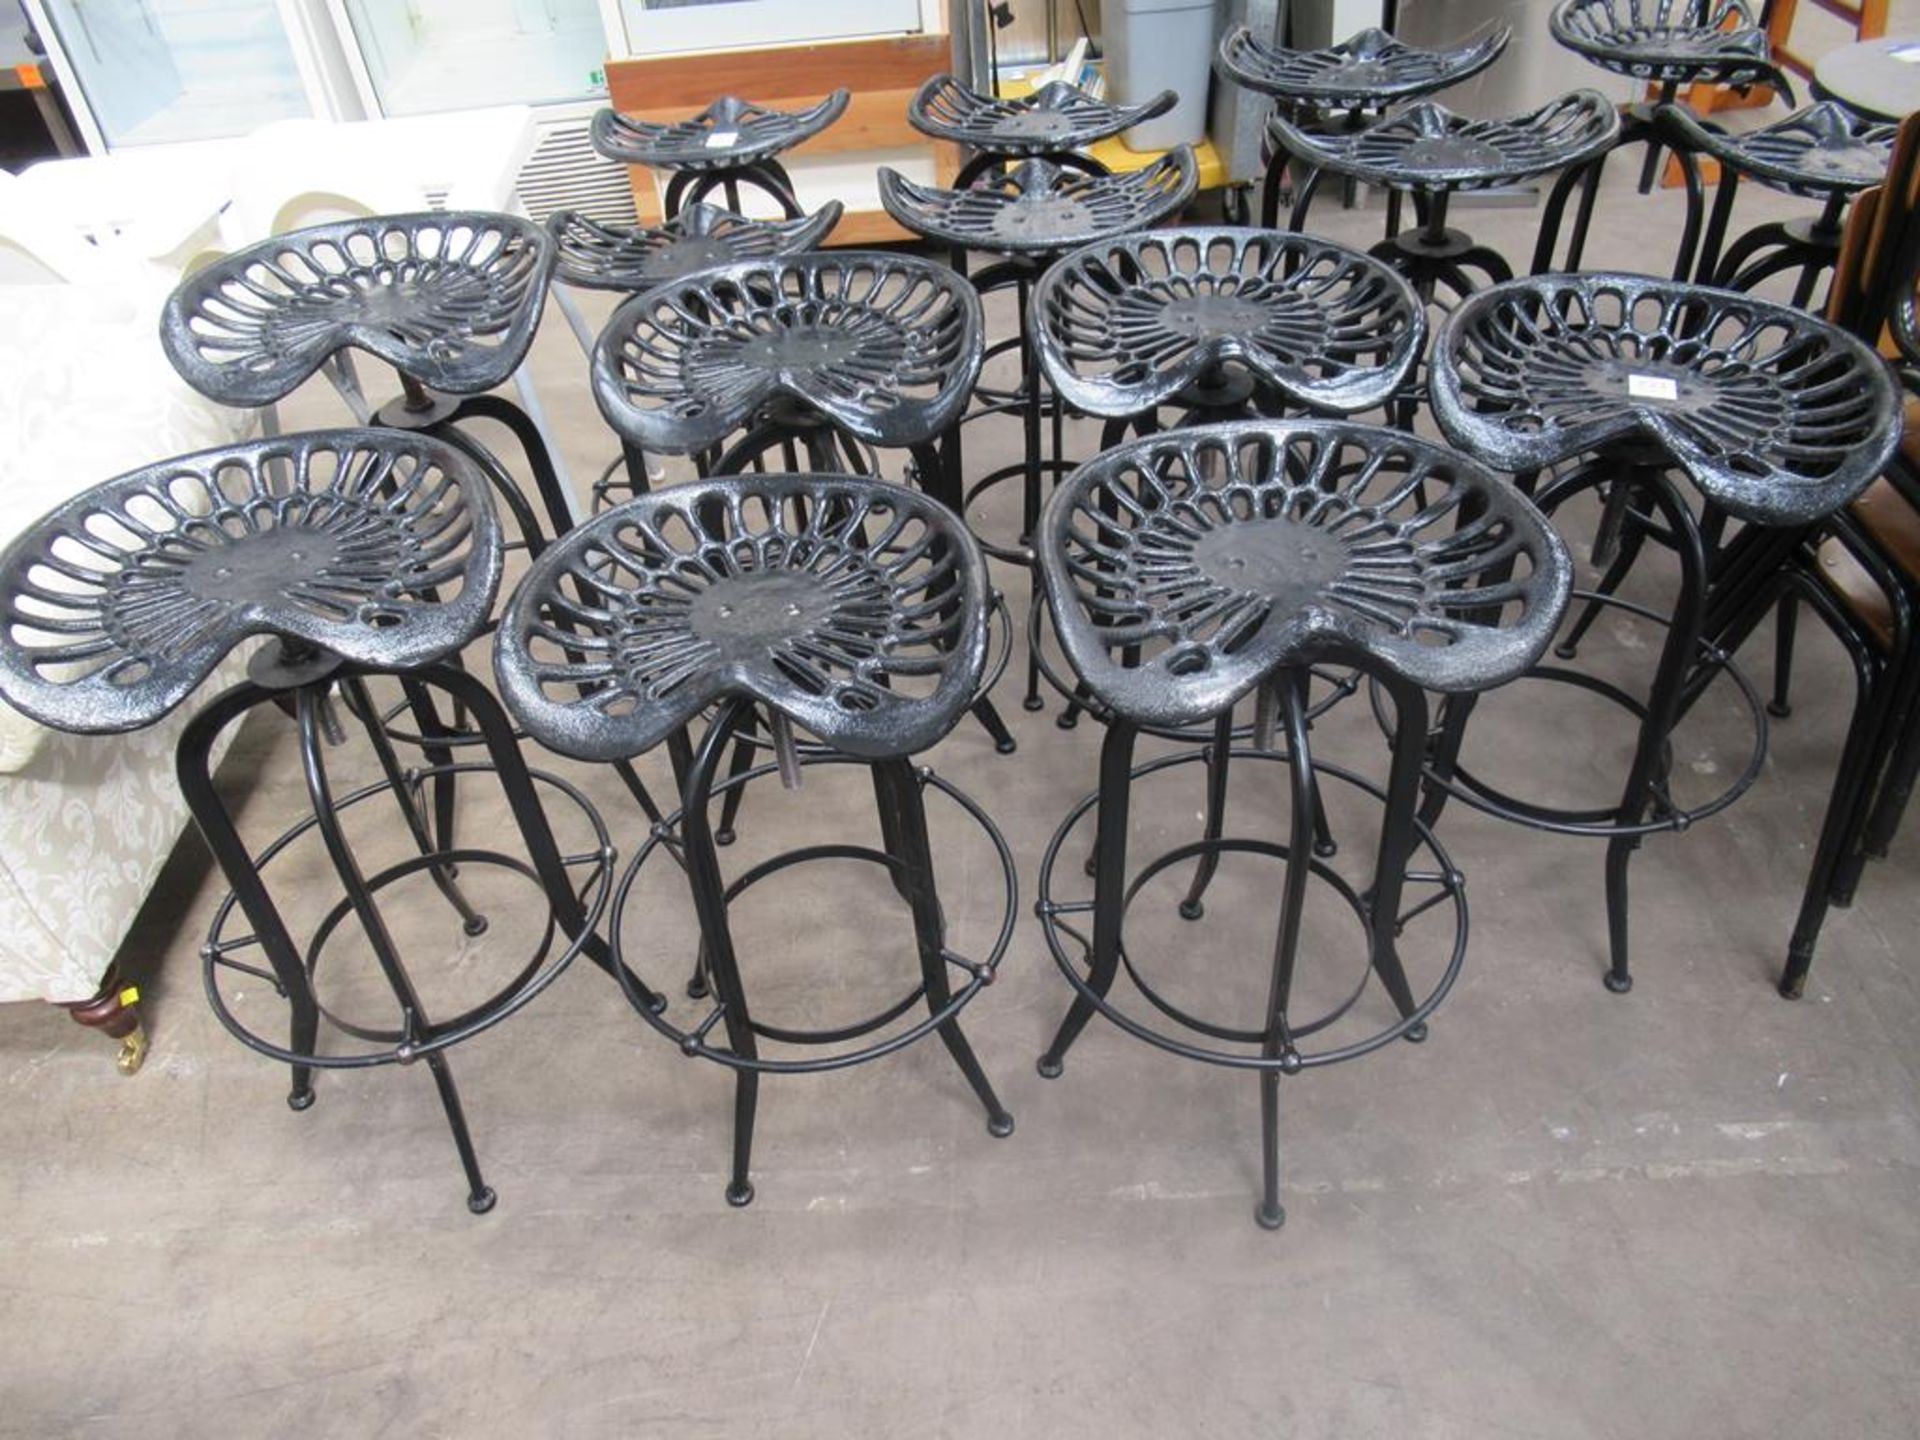 7 x Tractor Seat Stools